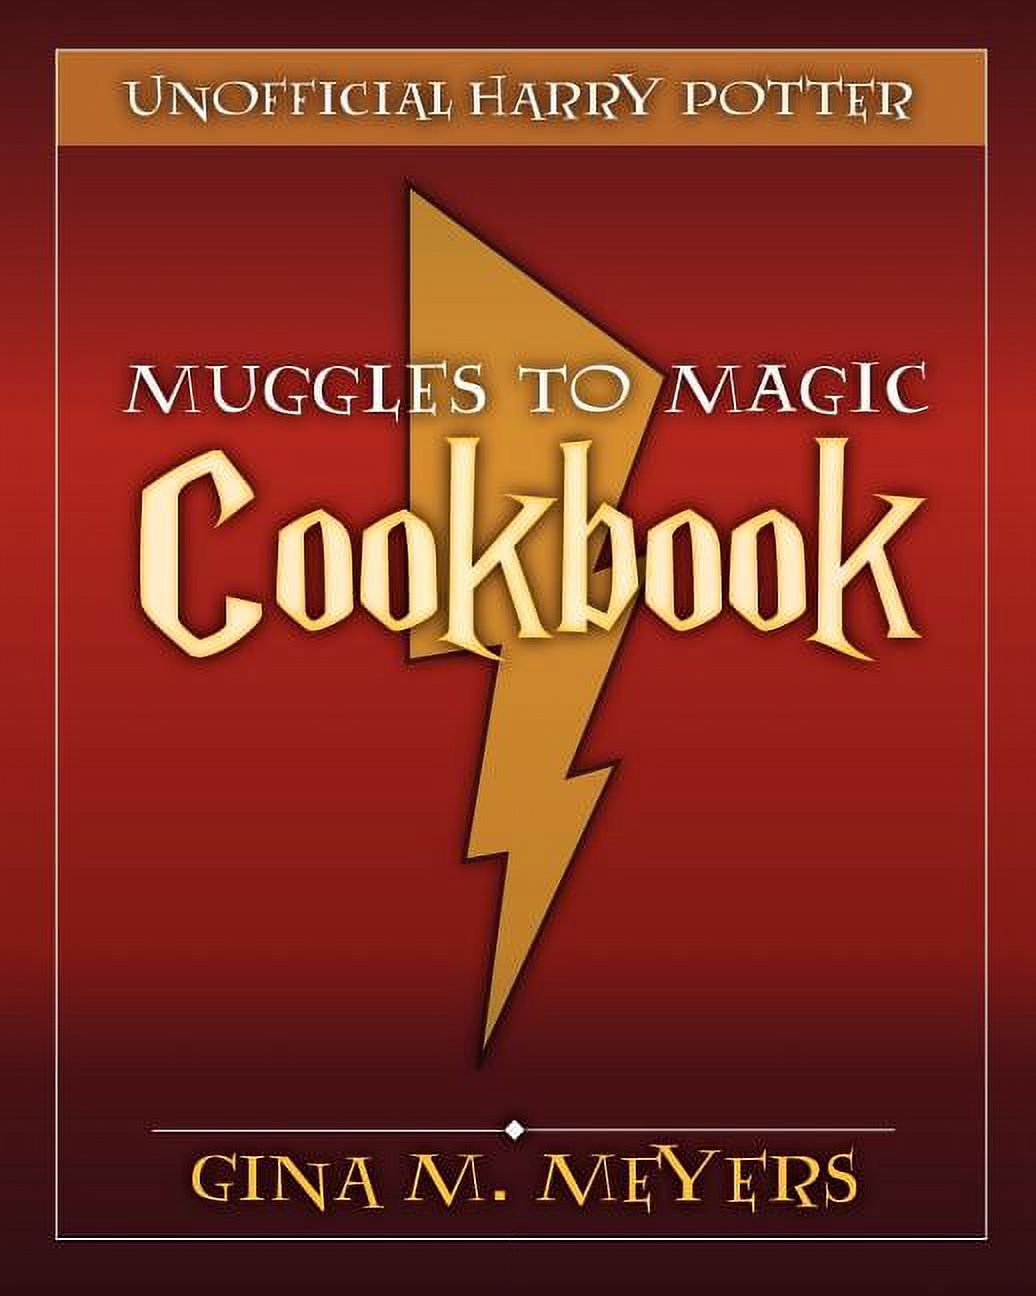 Unofficial Harry Potter Cookbook: From Muggles To Magic (Paperback) - image 1 of 1